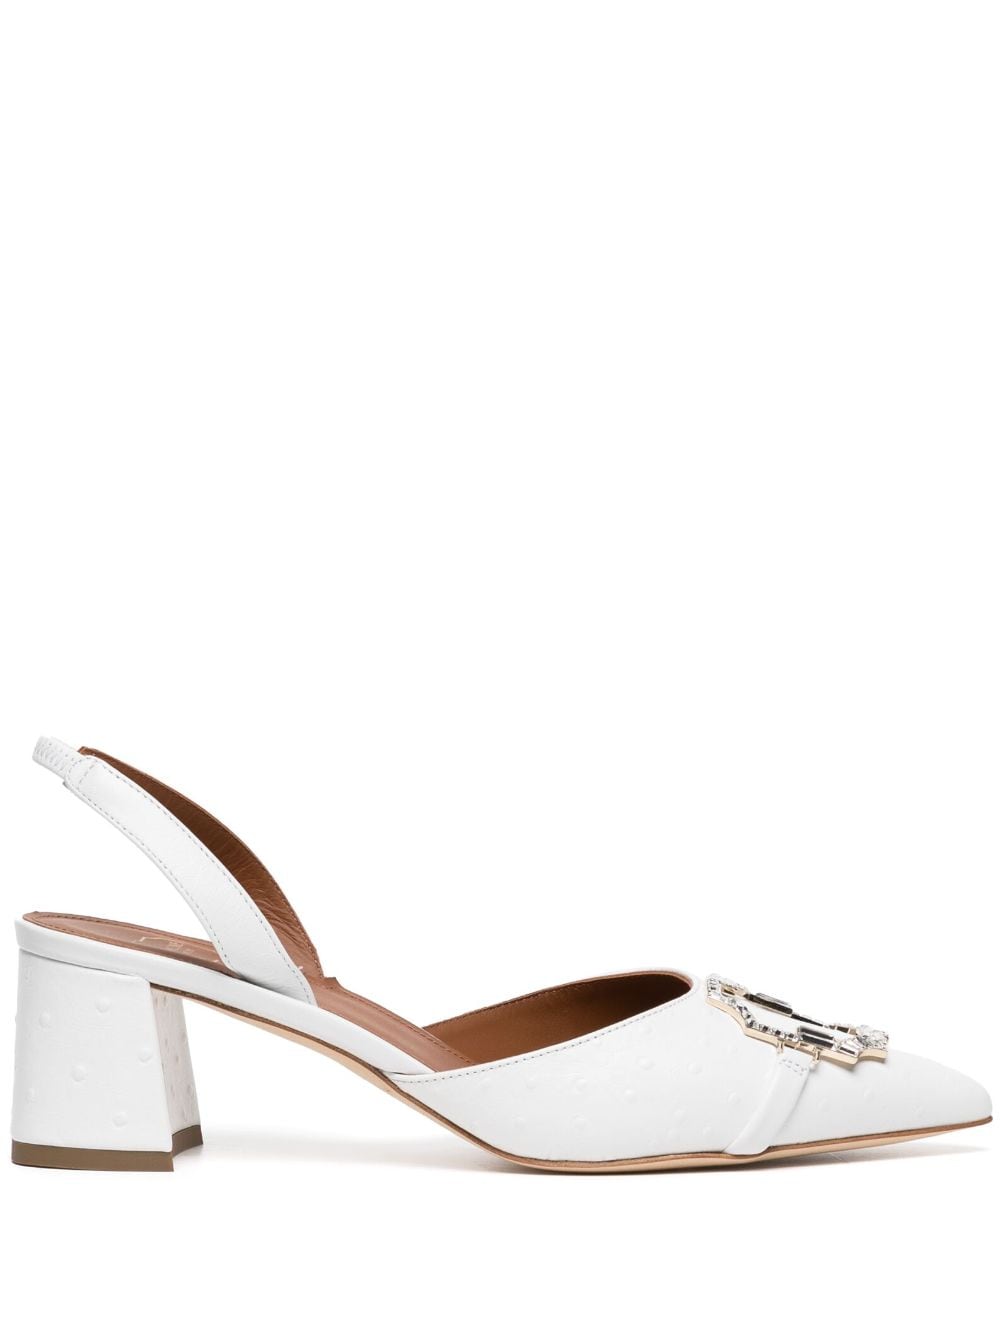 Malone Souliers Misha buckled leather pumps - White von Malone Souliers